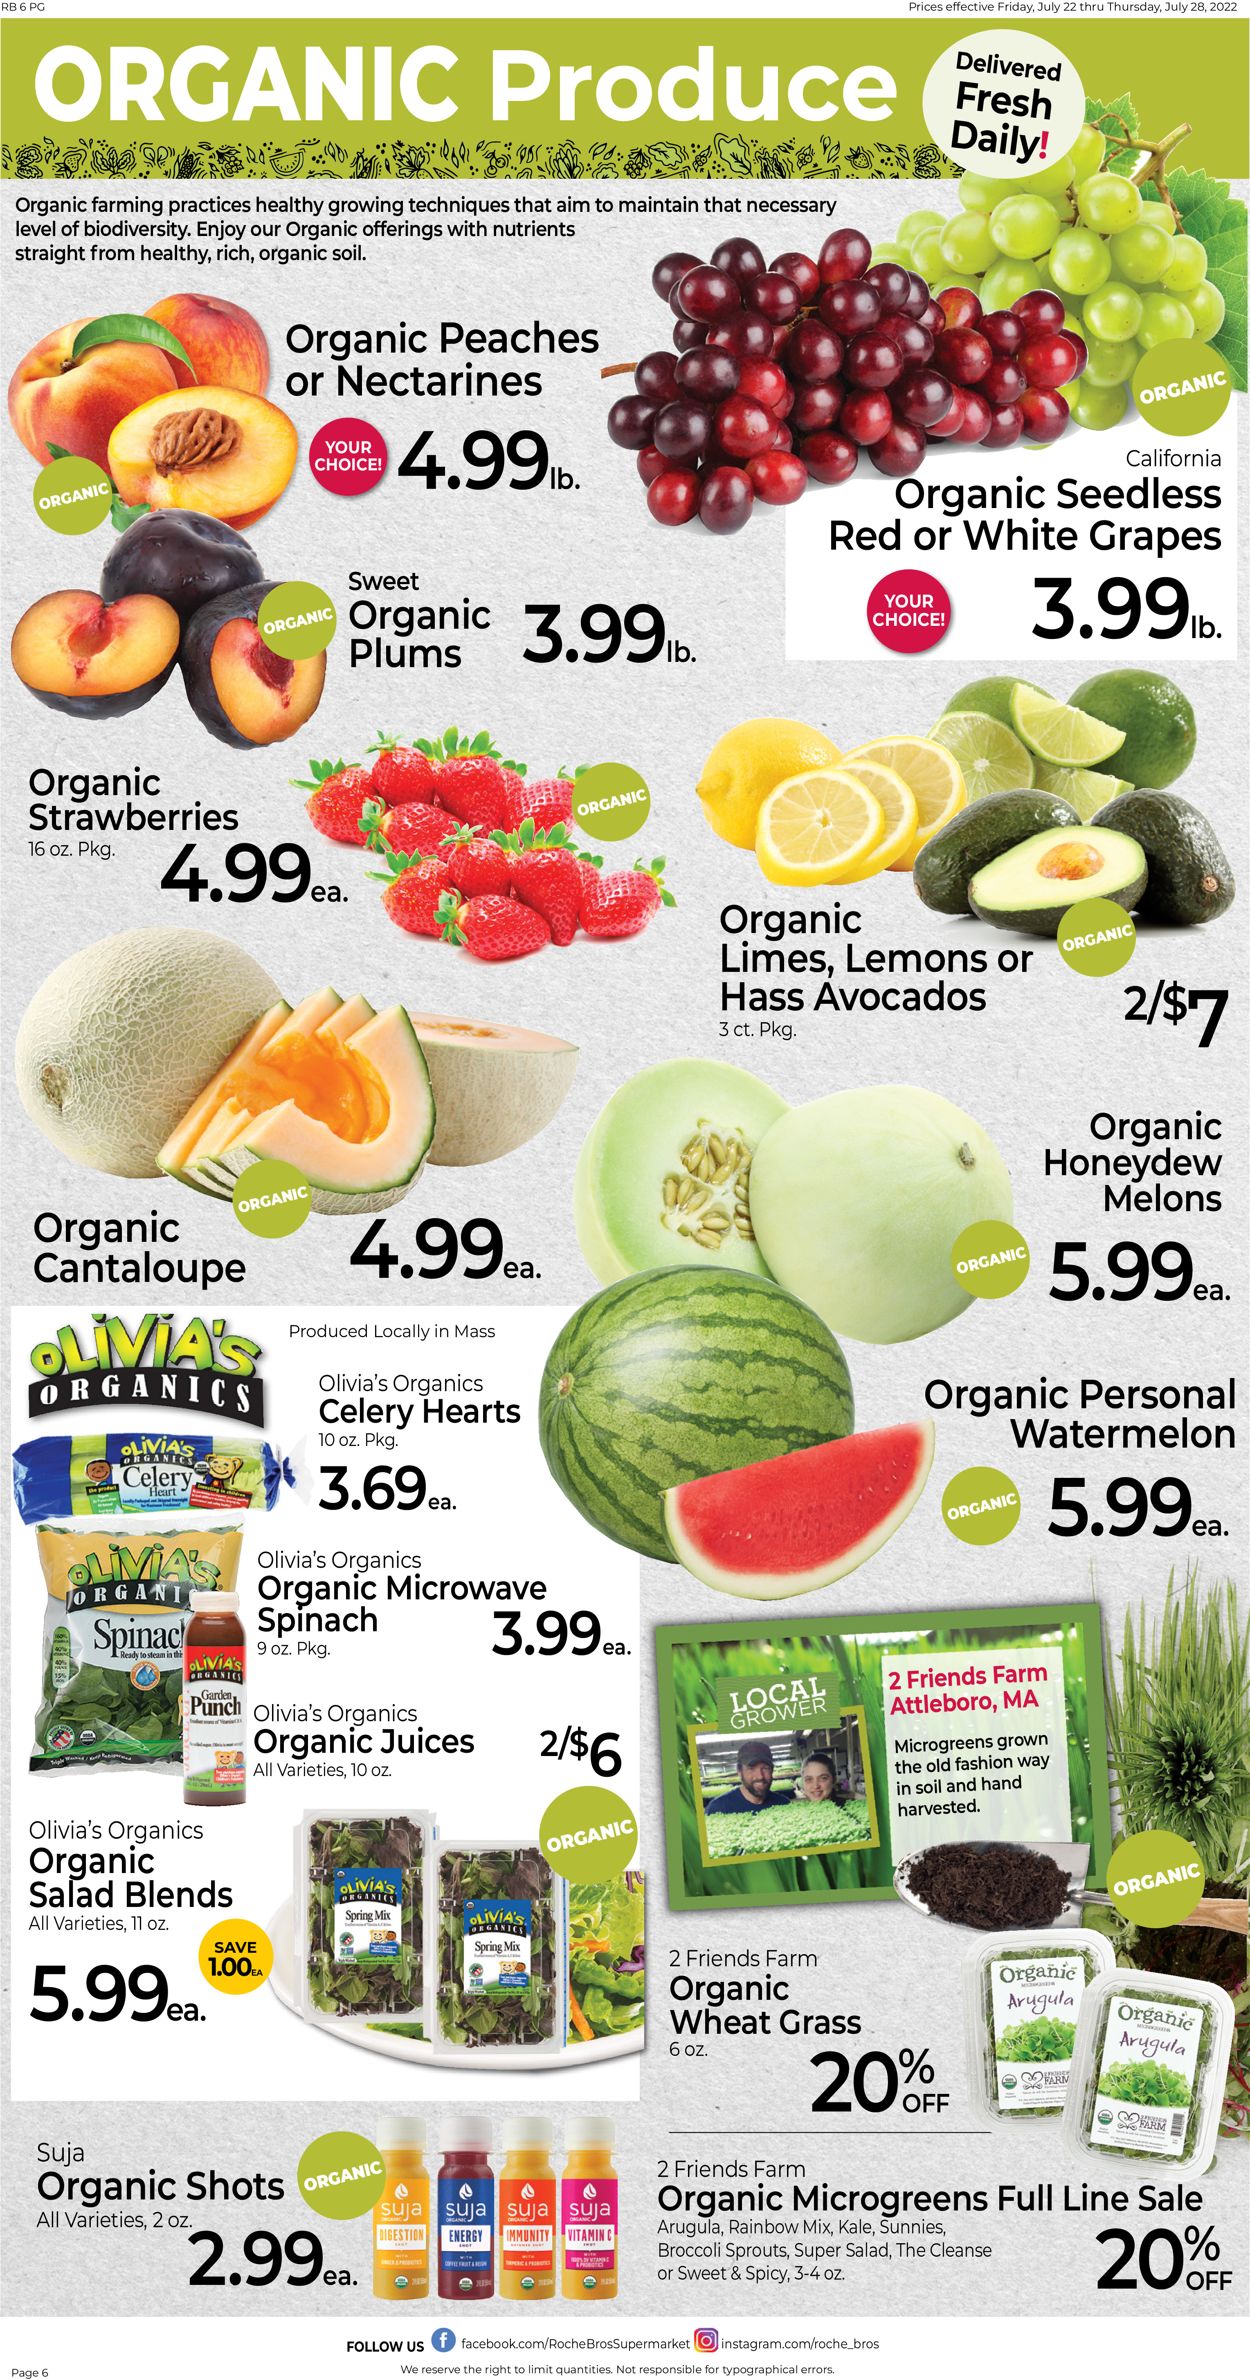 Catalogue Roche Bros. Supermarkets from 07/22/2022